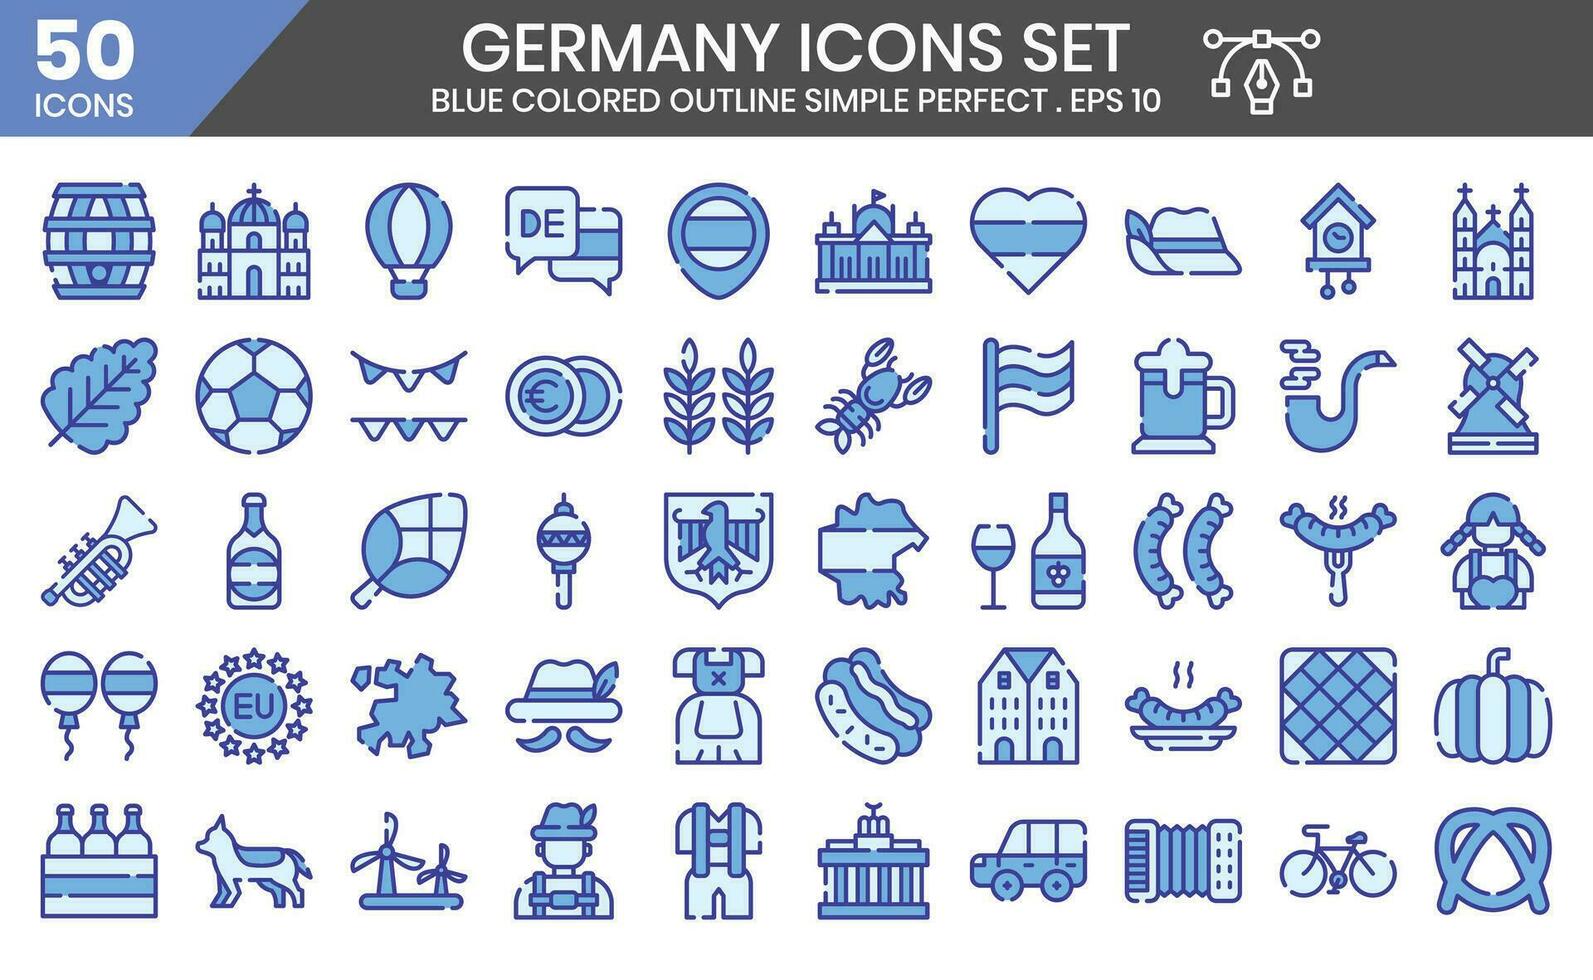 Germany blue color icons set. The element collections can be used in social media posts, web design, app design, and more vector